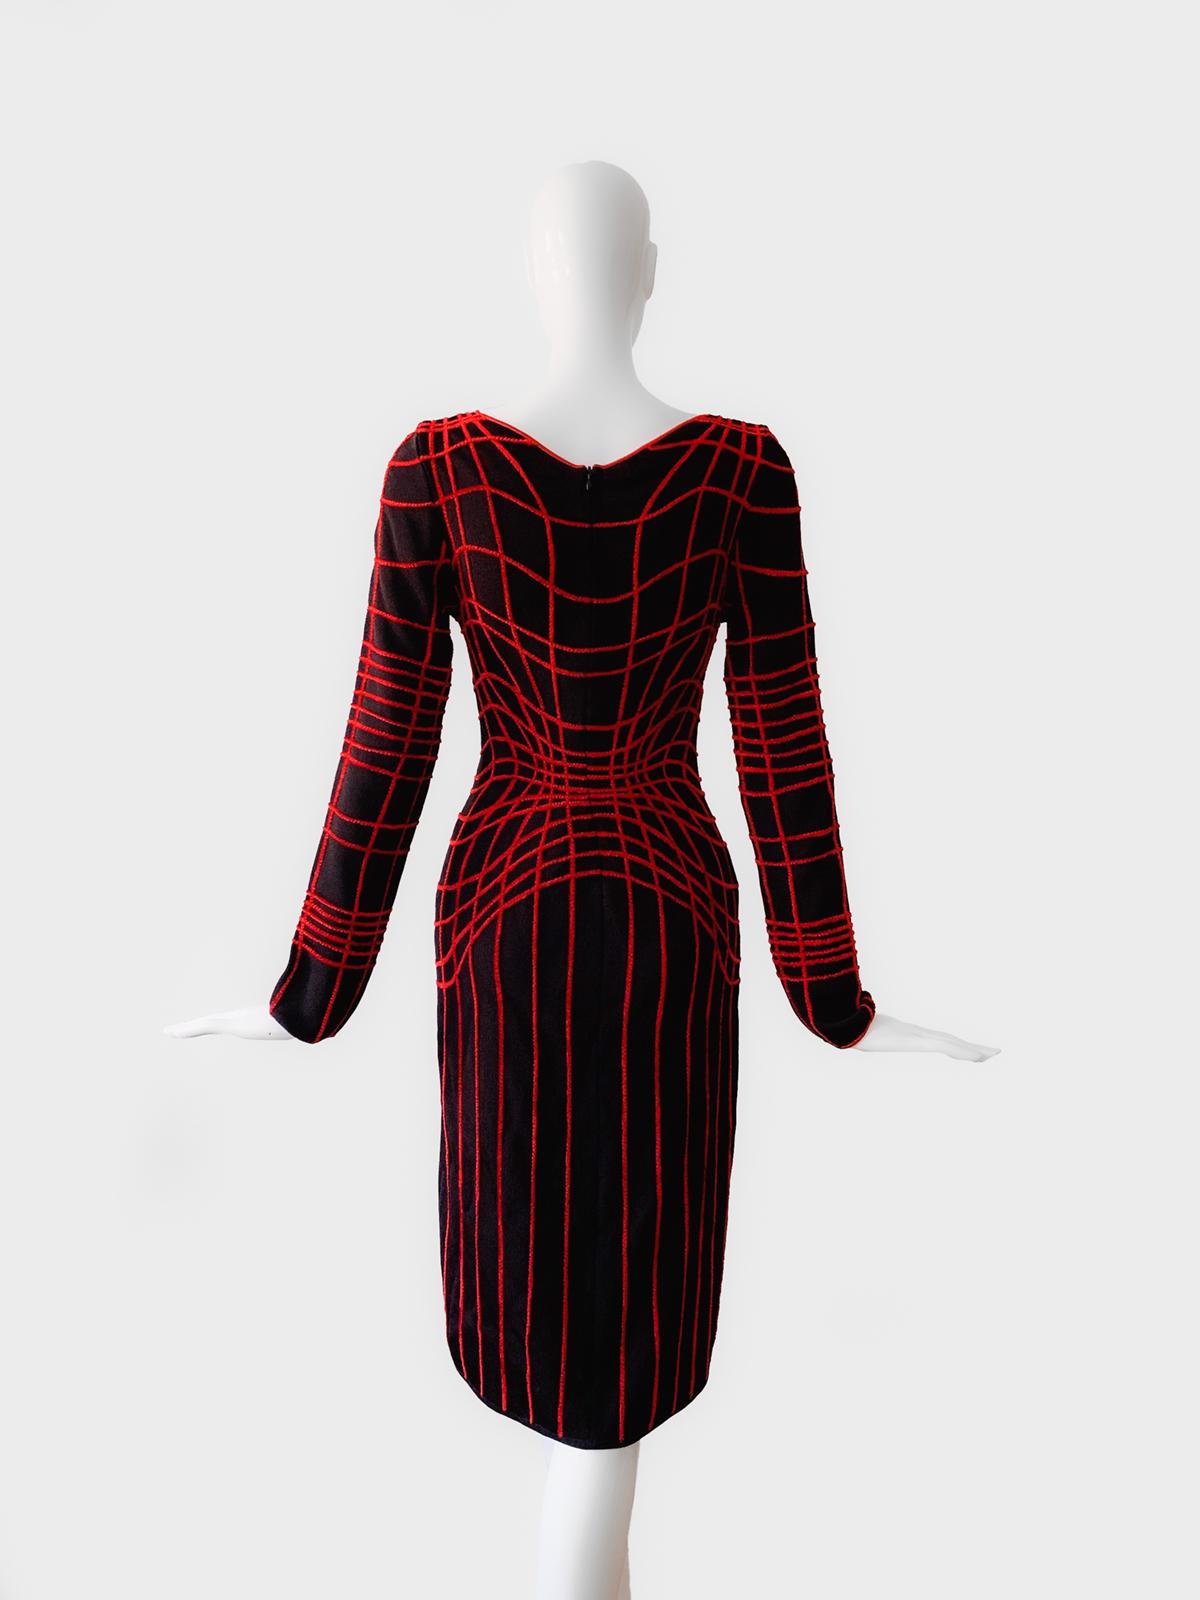 Iconic Thierry Mugler Couture Spider Dress FW 2001 Rare Museum Worthy Black Red  For Sale 5